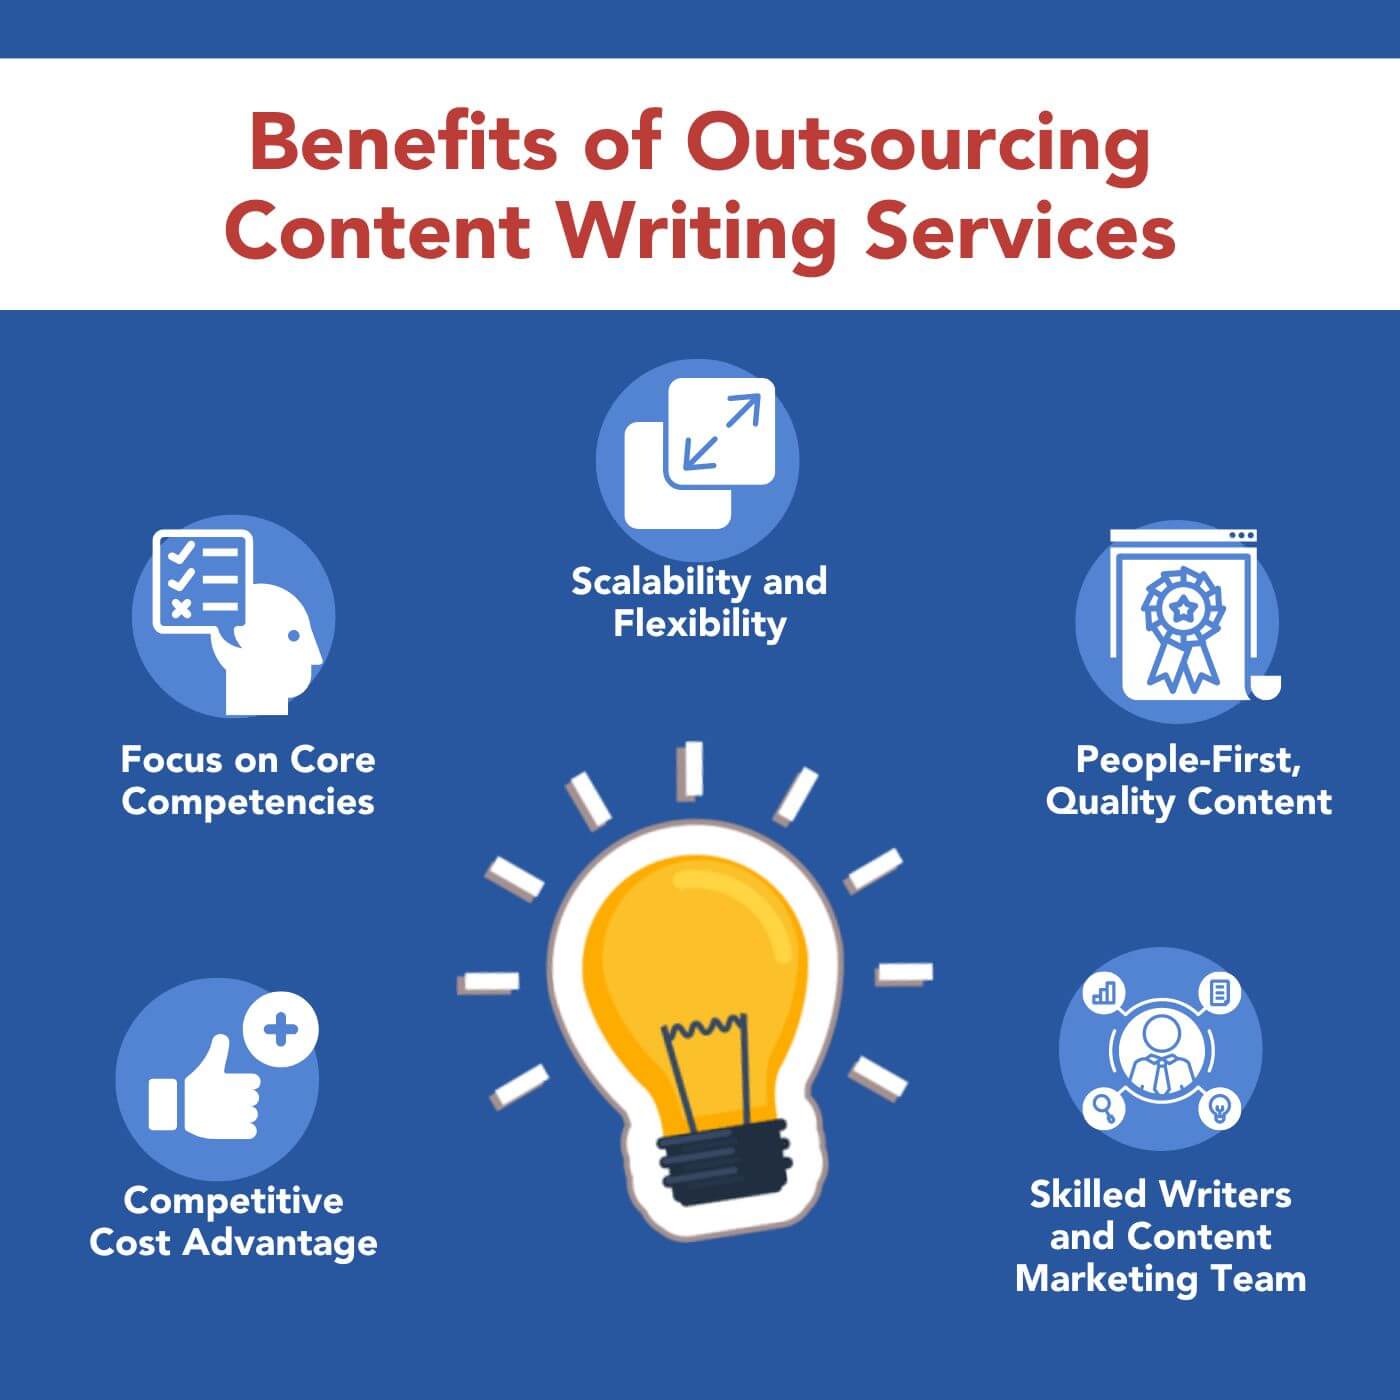 Benefits of Oursourcing Content Writing Services